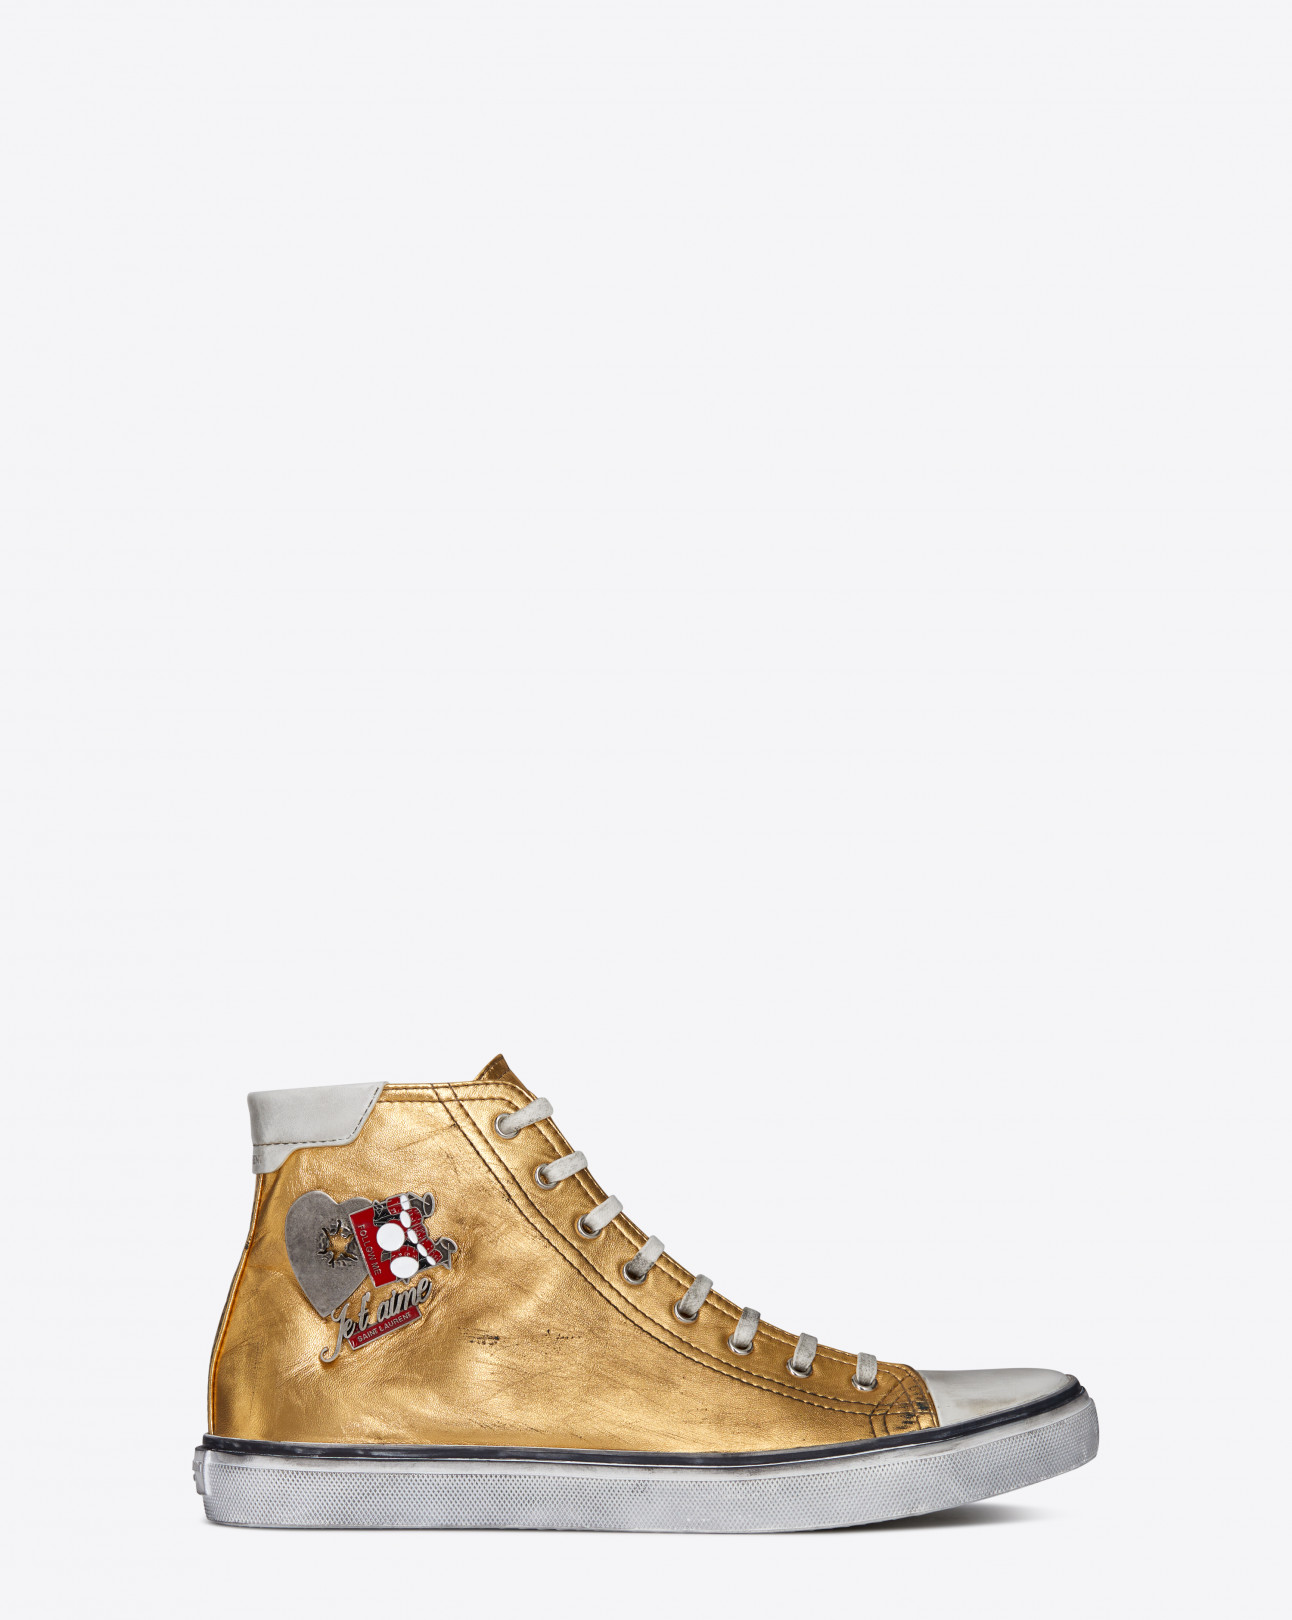 BEDFORD MID TOP SNEAKER IN GOLD NAPPA METALIZED LEATHER 10万円